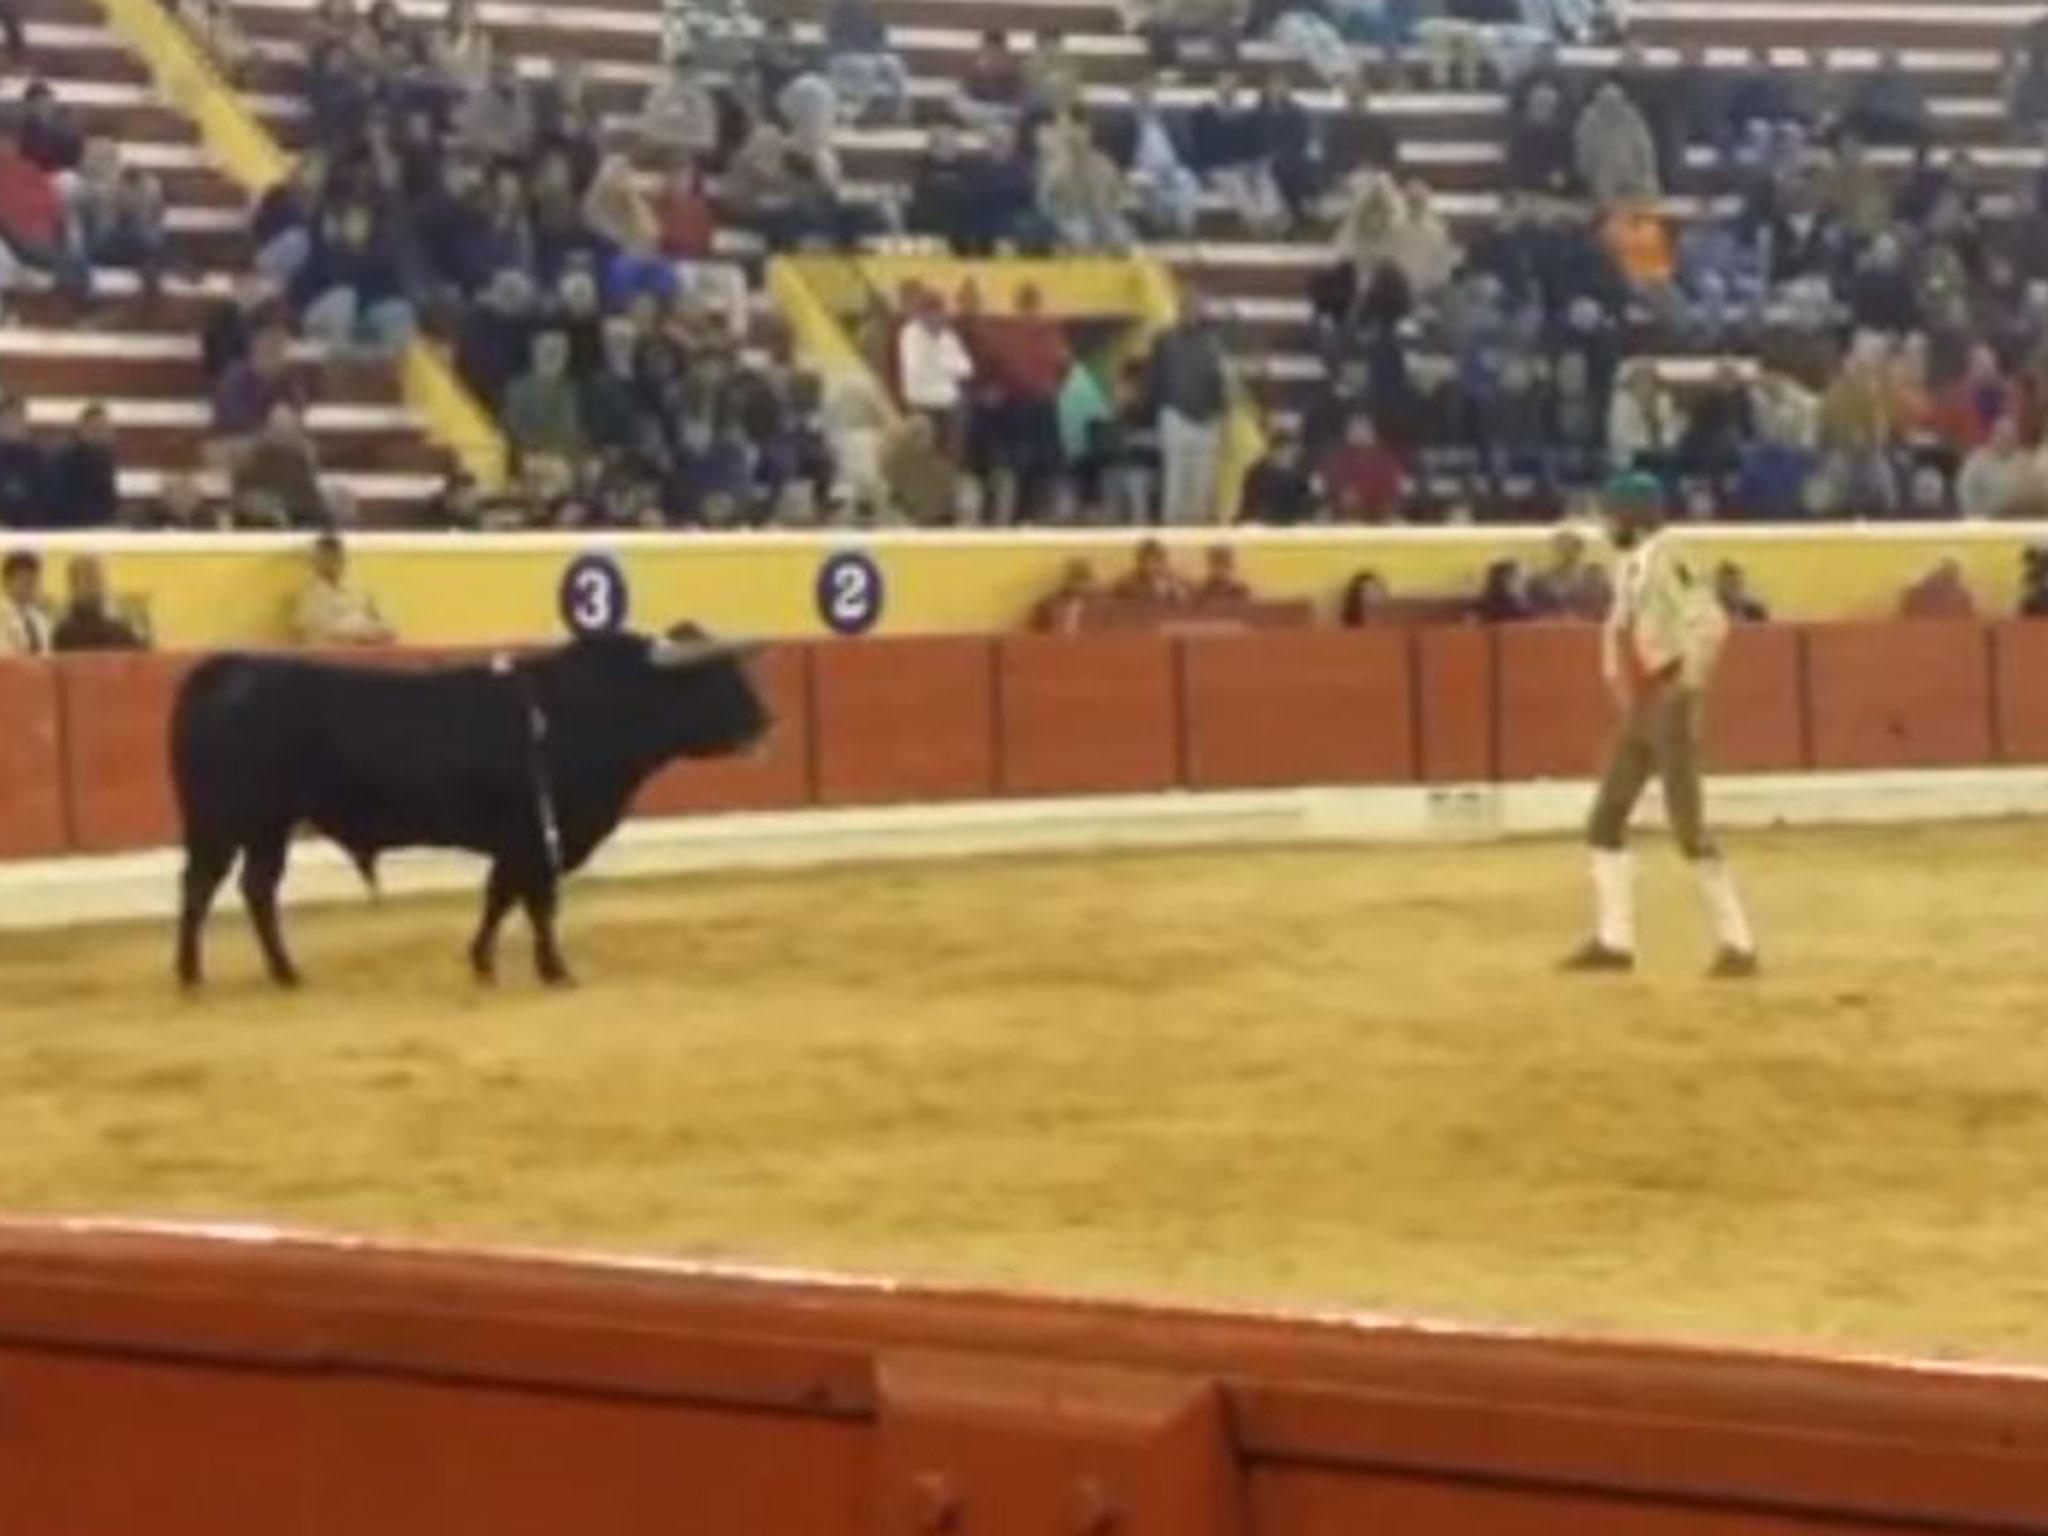 Fernando Quintela was trapped between the bulls horns and then tossed to the ground